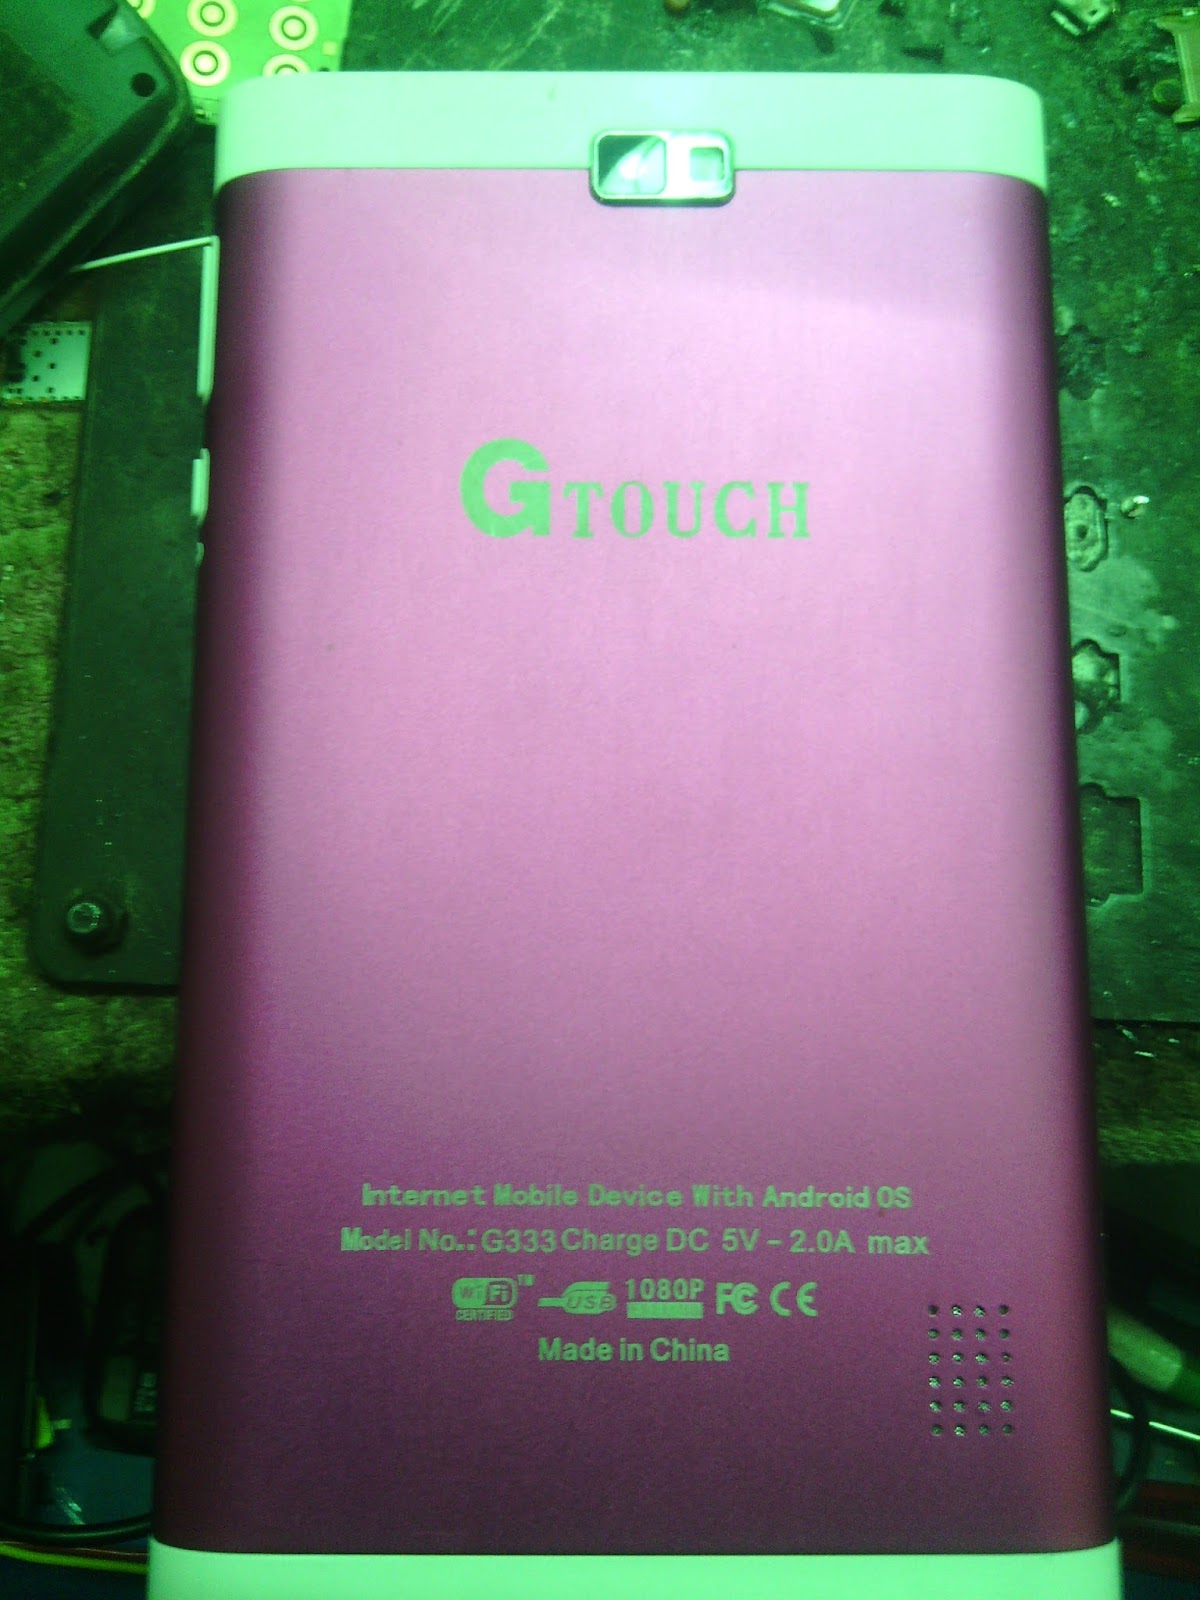    GTOUCH-G333